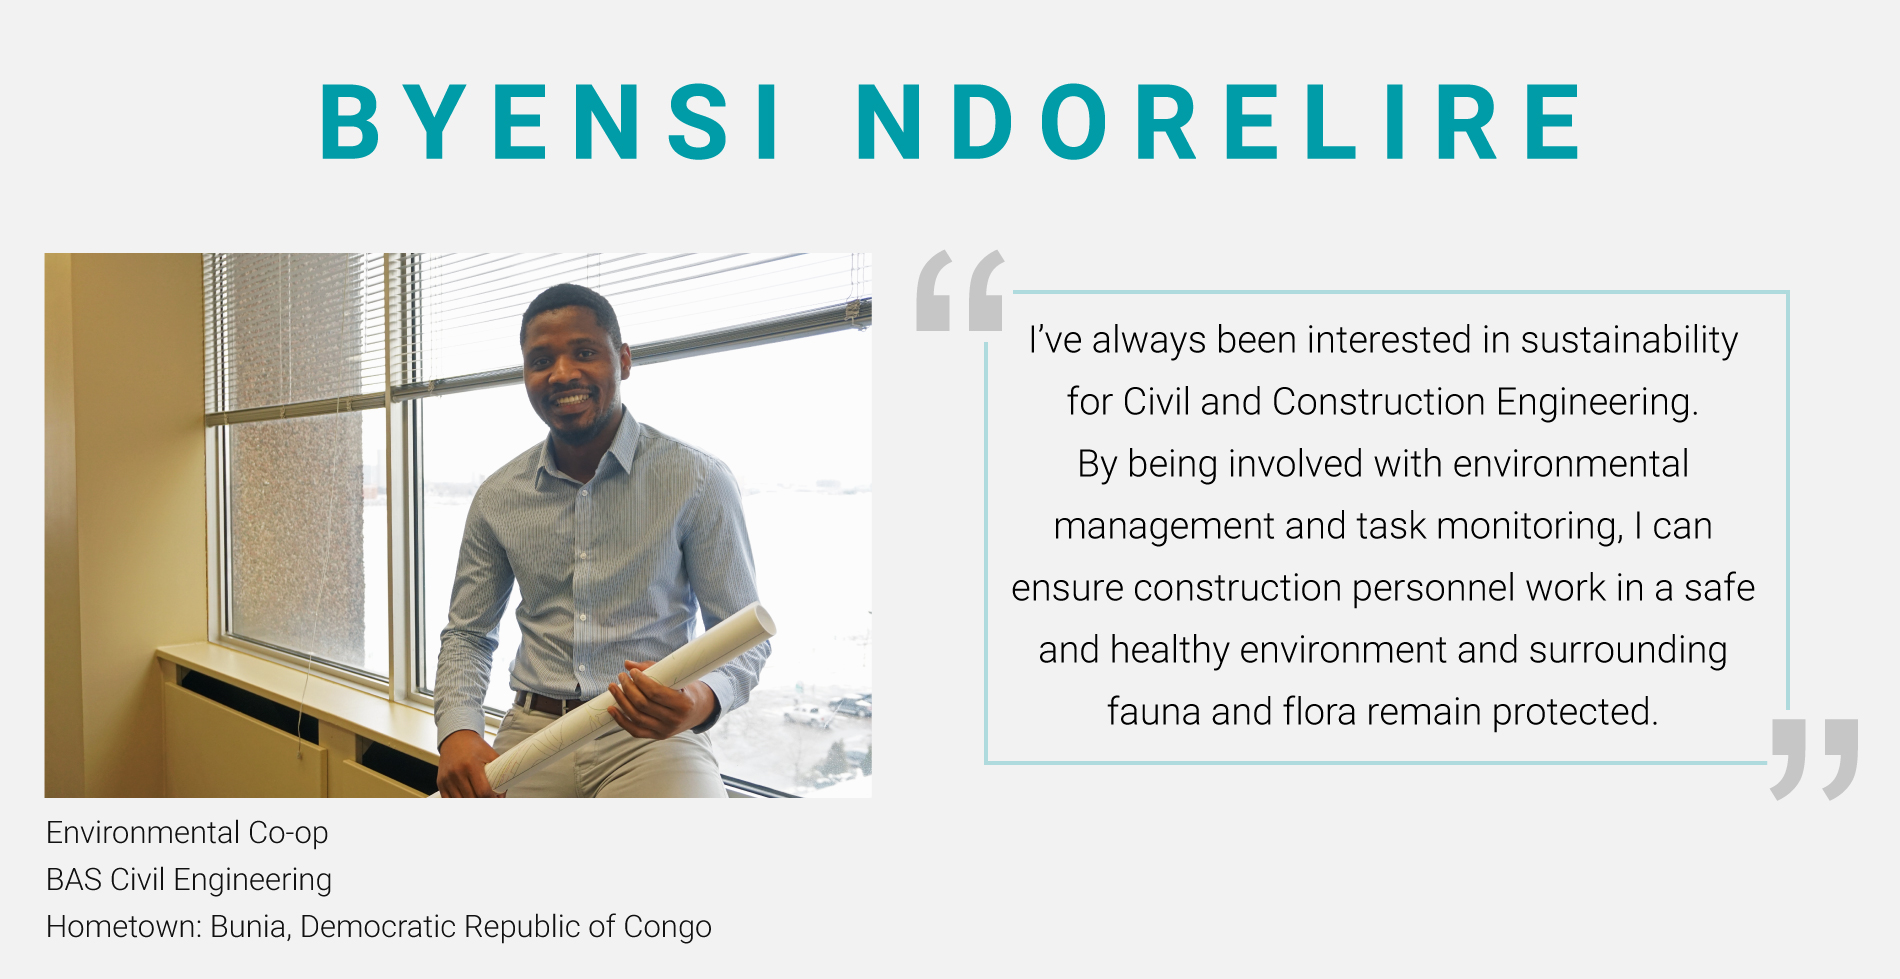 Byensi Ndorelire, Environmental Co-op. BAS Civil Engineering. "i've always been interested in sustainability for Civil and Construction Engineering. By being involved with environmental management and task monitoring, I can ensure construction personnel work in a safe and healthy environment and surrounding fauna and flora remain protected."